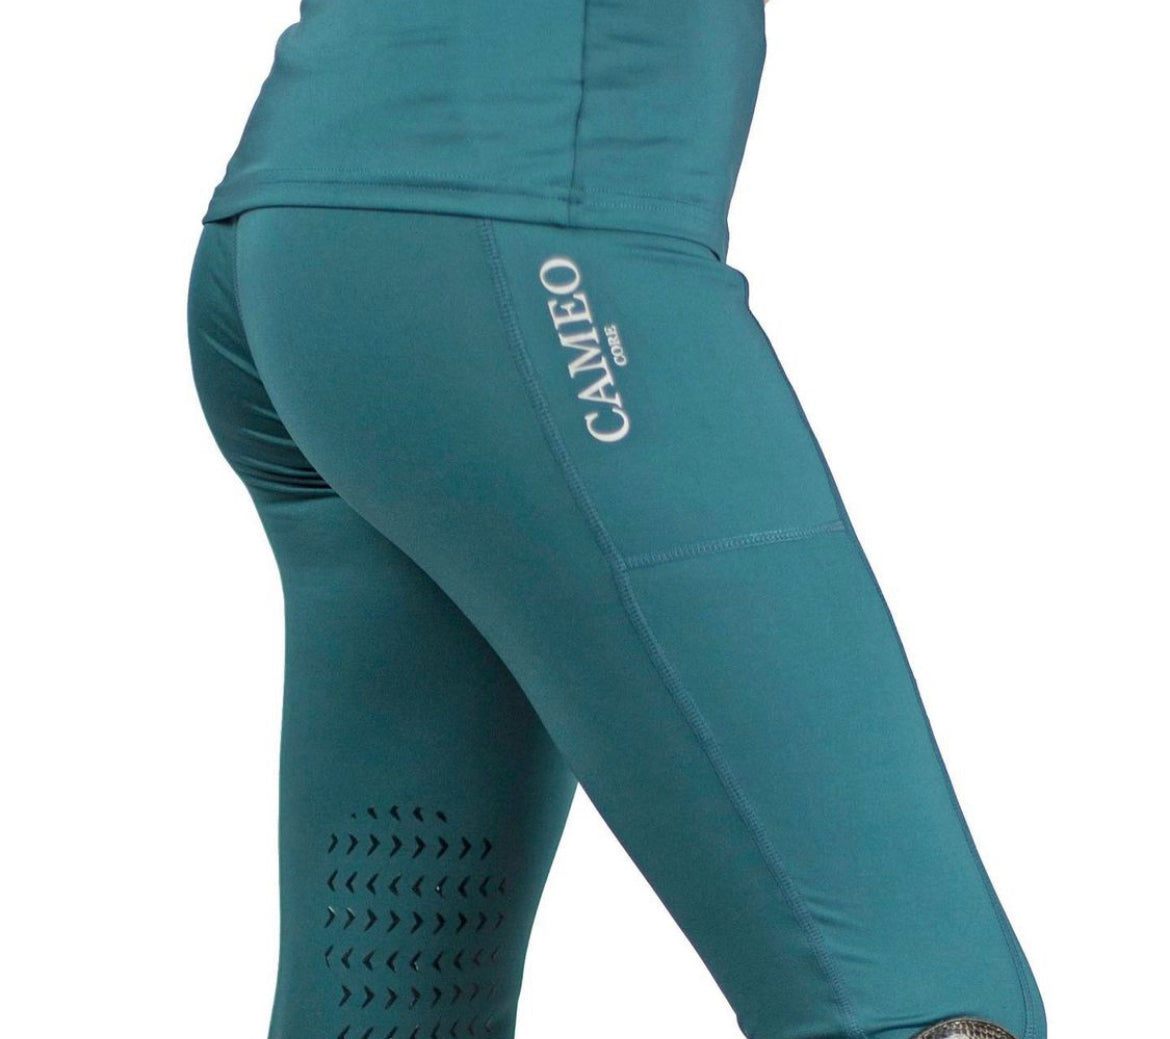 Cameo Core Collection Riding Tights  - All Sizes